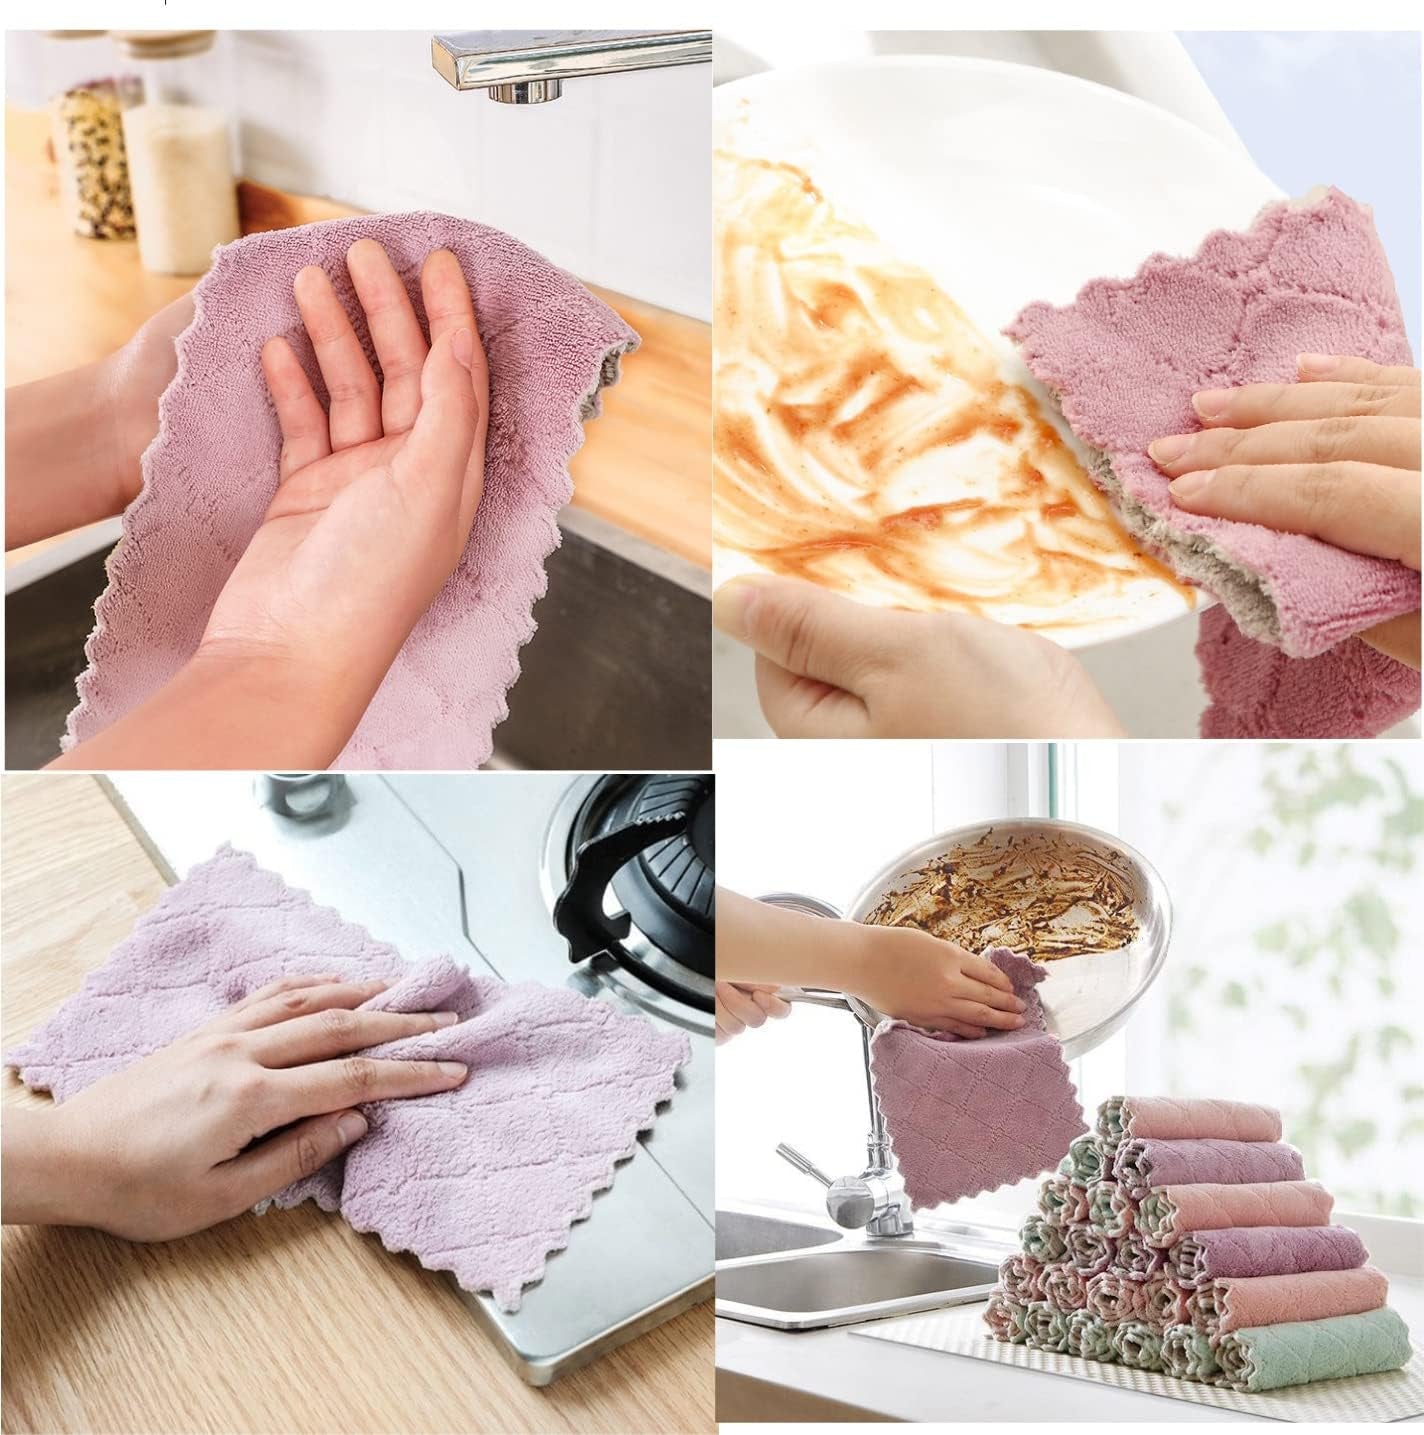 20 Pack Kitchen Towels Quick Dry Washcloths, Coral Velvet Dishtowels Multipurpose Reusable Cloths, Soft Tea Absorbent Cleaning Cloths Double-Sided Microfiber Lint Free Rags.